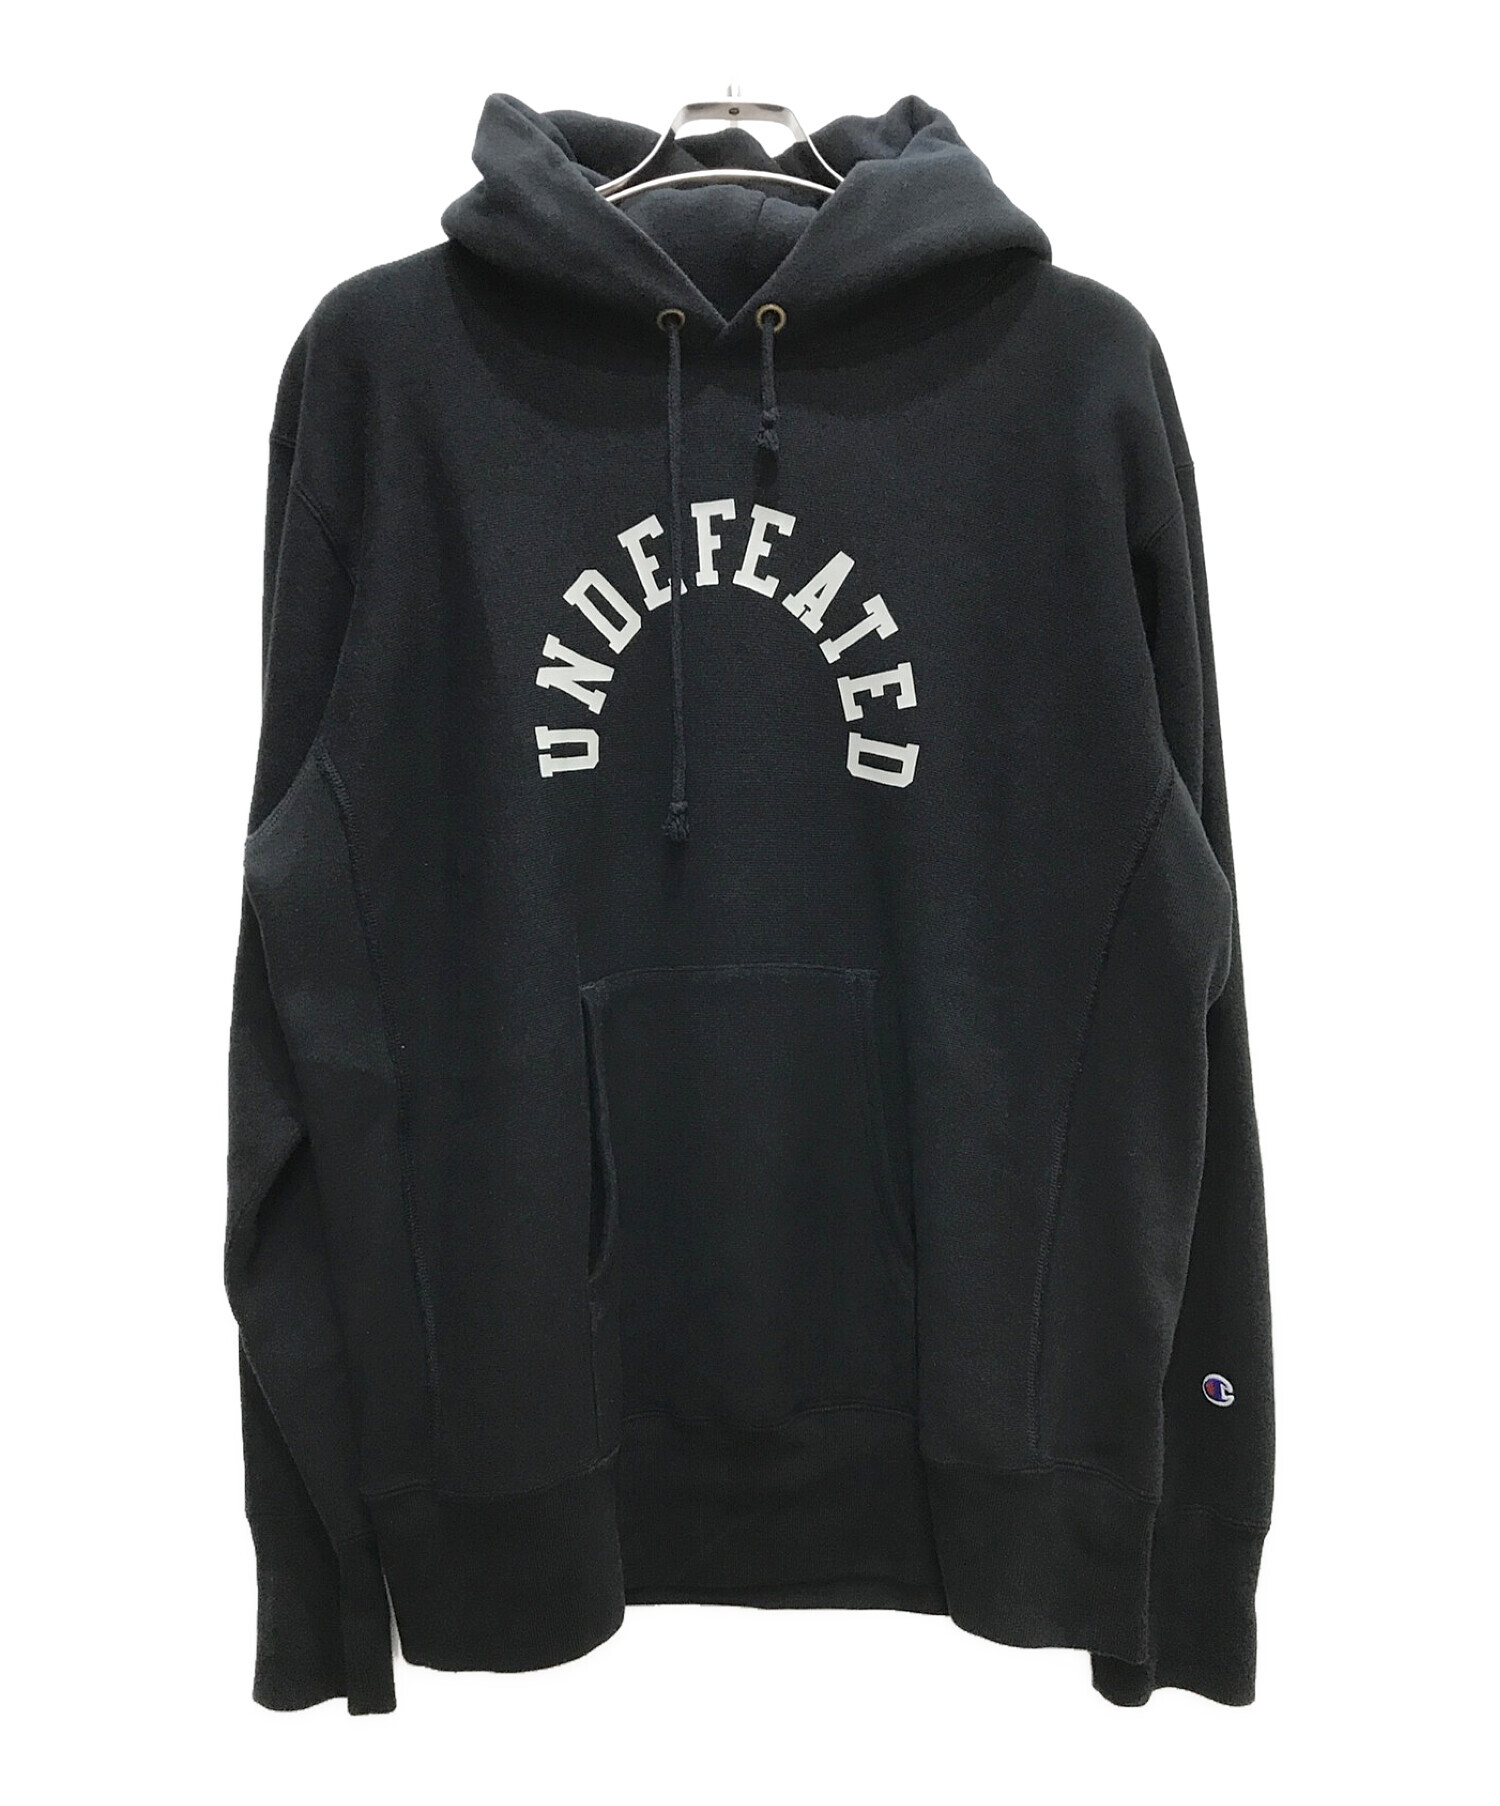 UNDEFEATED X CHAMPION REVERSE WEAVE